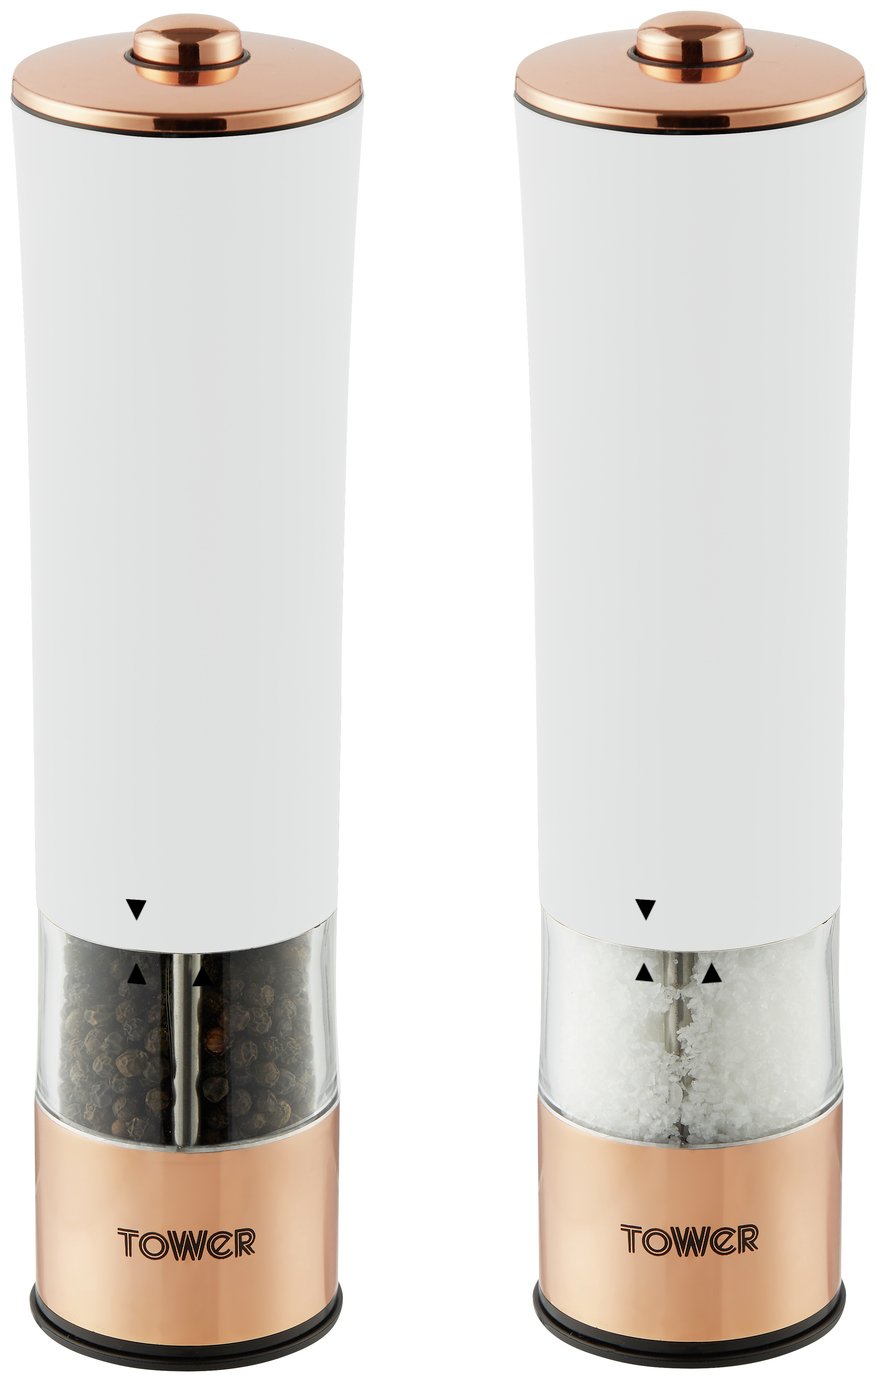 Tower Electric Salt and Pepper Mill - White and Rose Gold